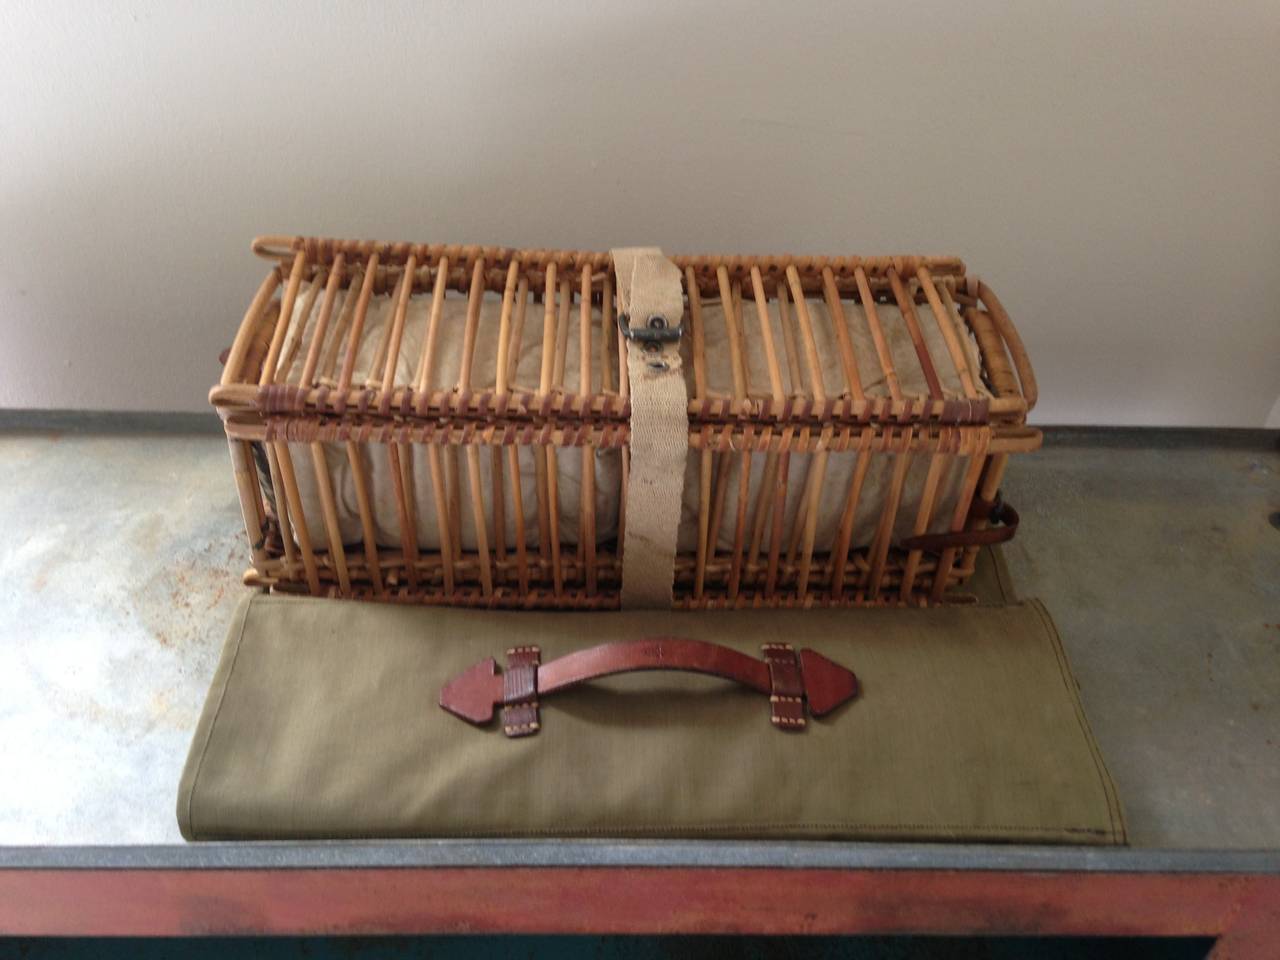 World War II messenger pigeon carrier for two pigeons. Complete with two comfy pigeon berths, portable exercise pen and canvas carrying case with leather handles and strapping. Rare piece of war memorabilia in excellent condition used to transport